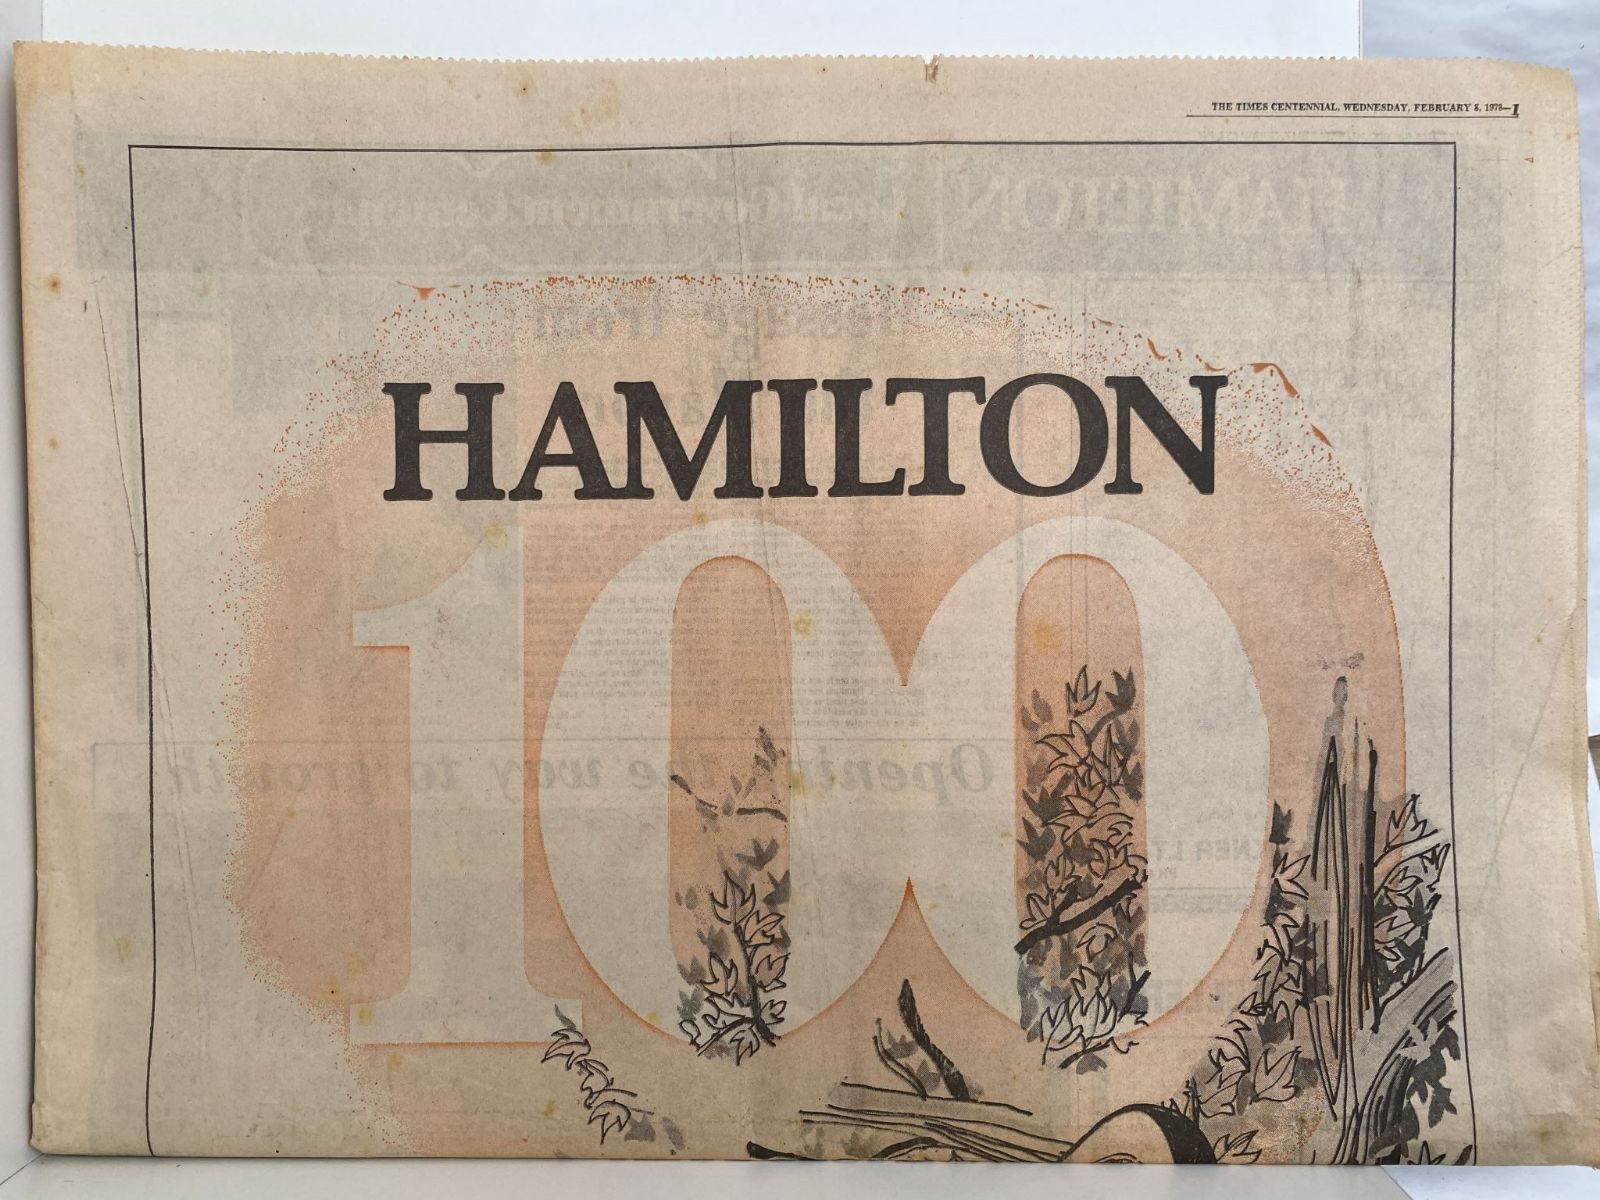 OLD NEWSPAPER: The Waikato Times, 8 February 1978 - Hamilton 100 Years Old